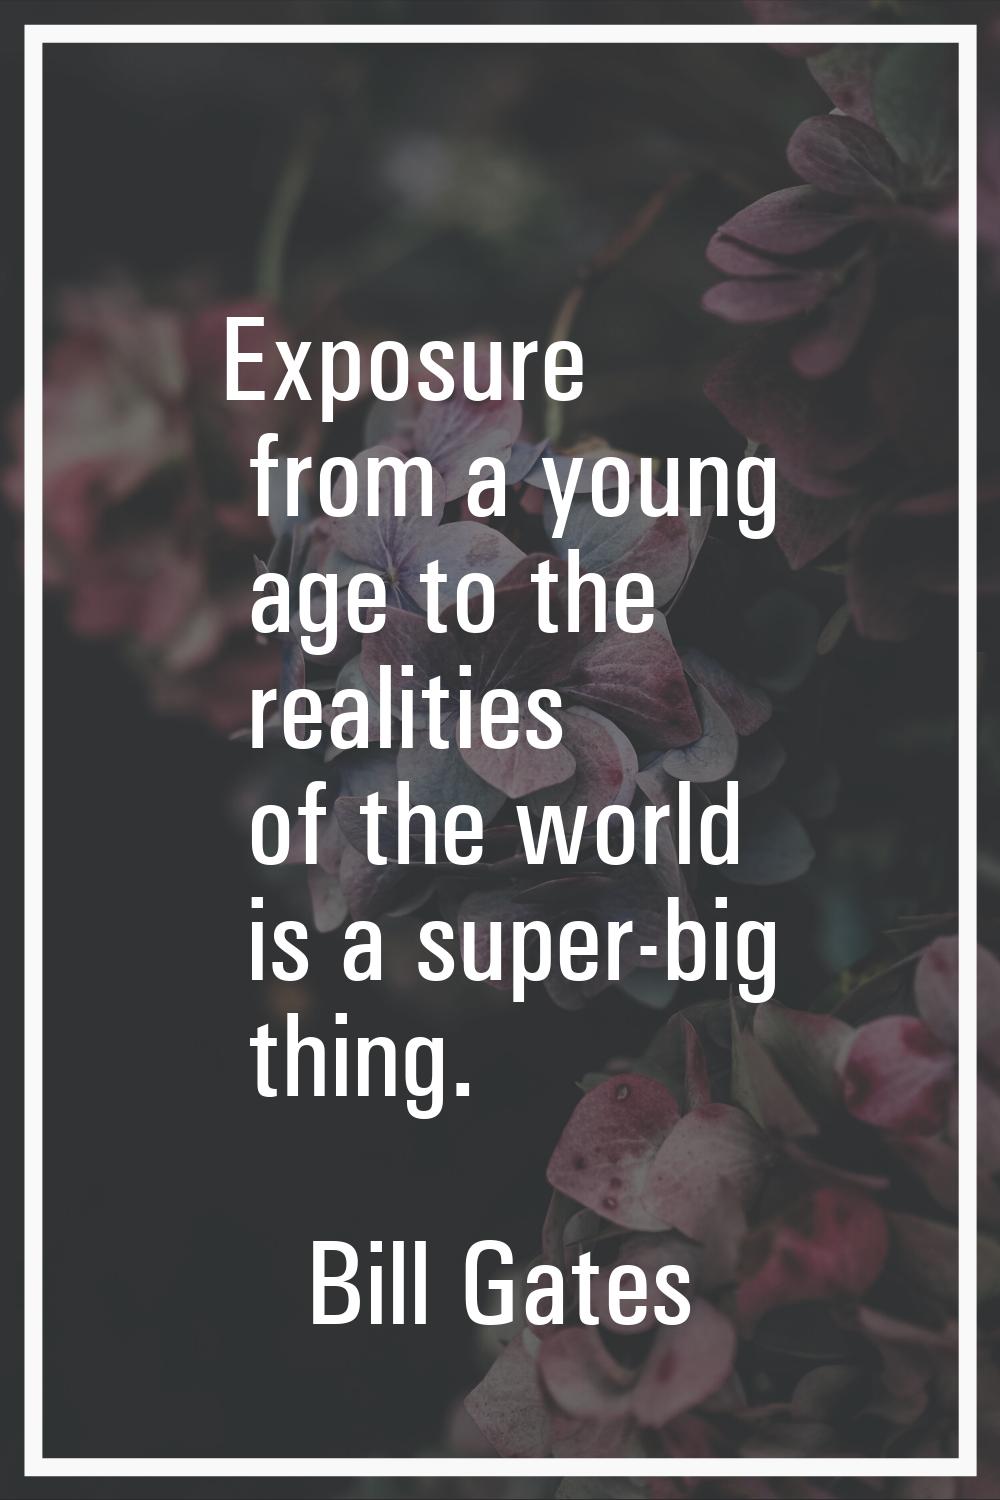 Exposure from a young age to the realities of the world is a super-big thing.